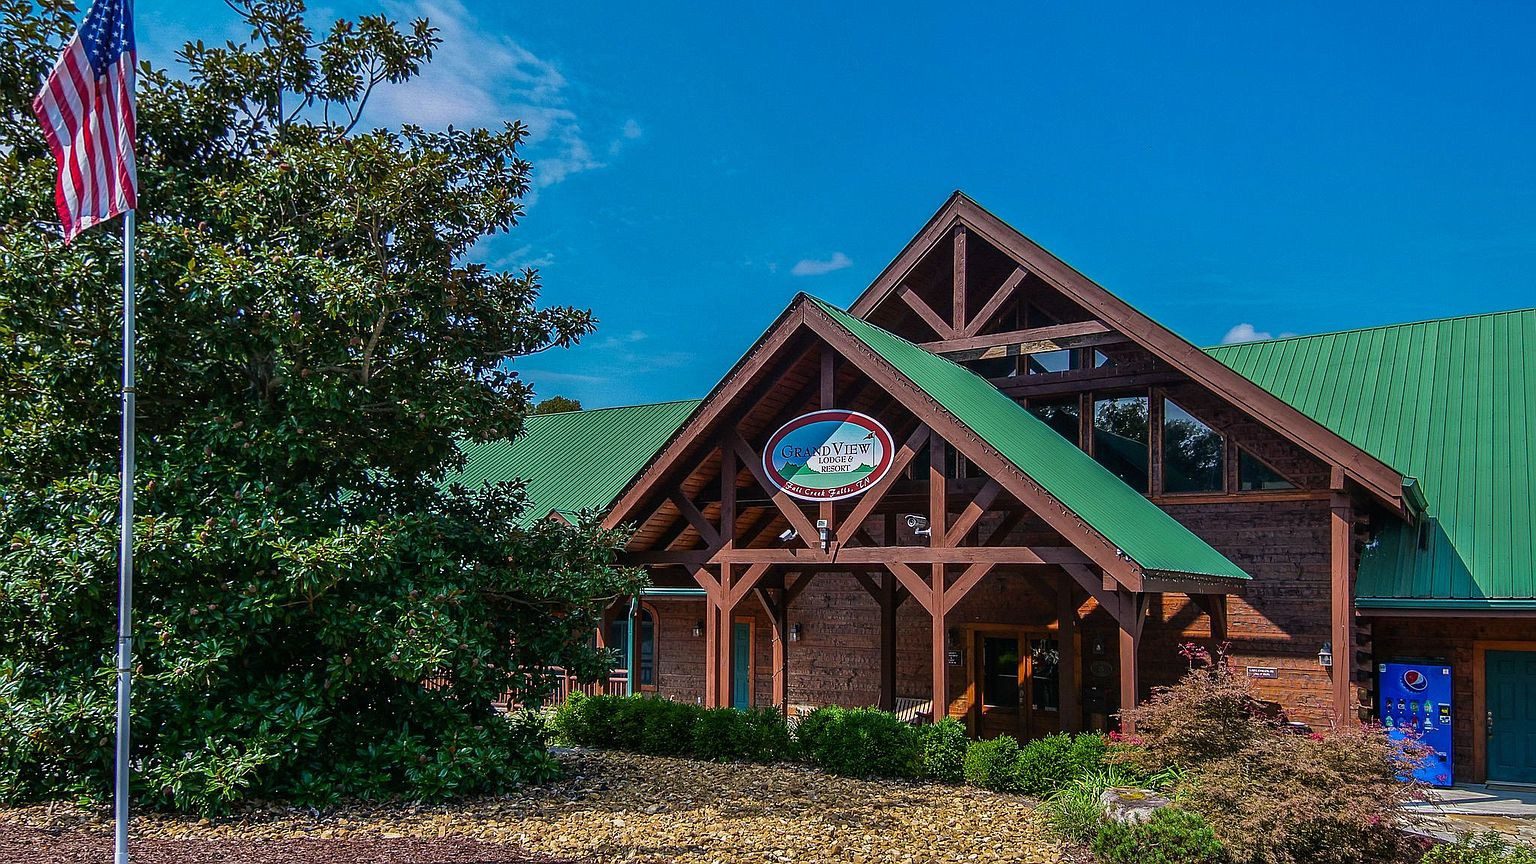 Grandview Lodge is opening a new lounge to visit with friends, watch sports, and listen to music with beverages and snacks.